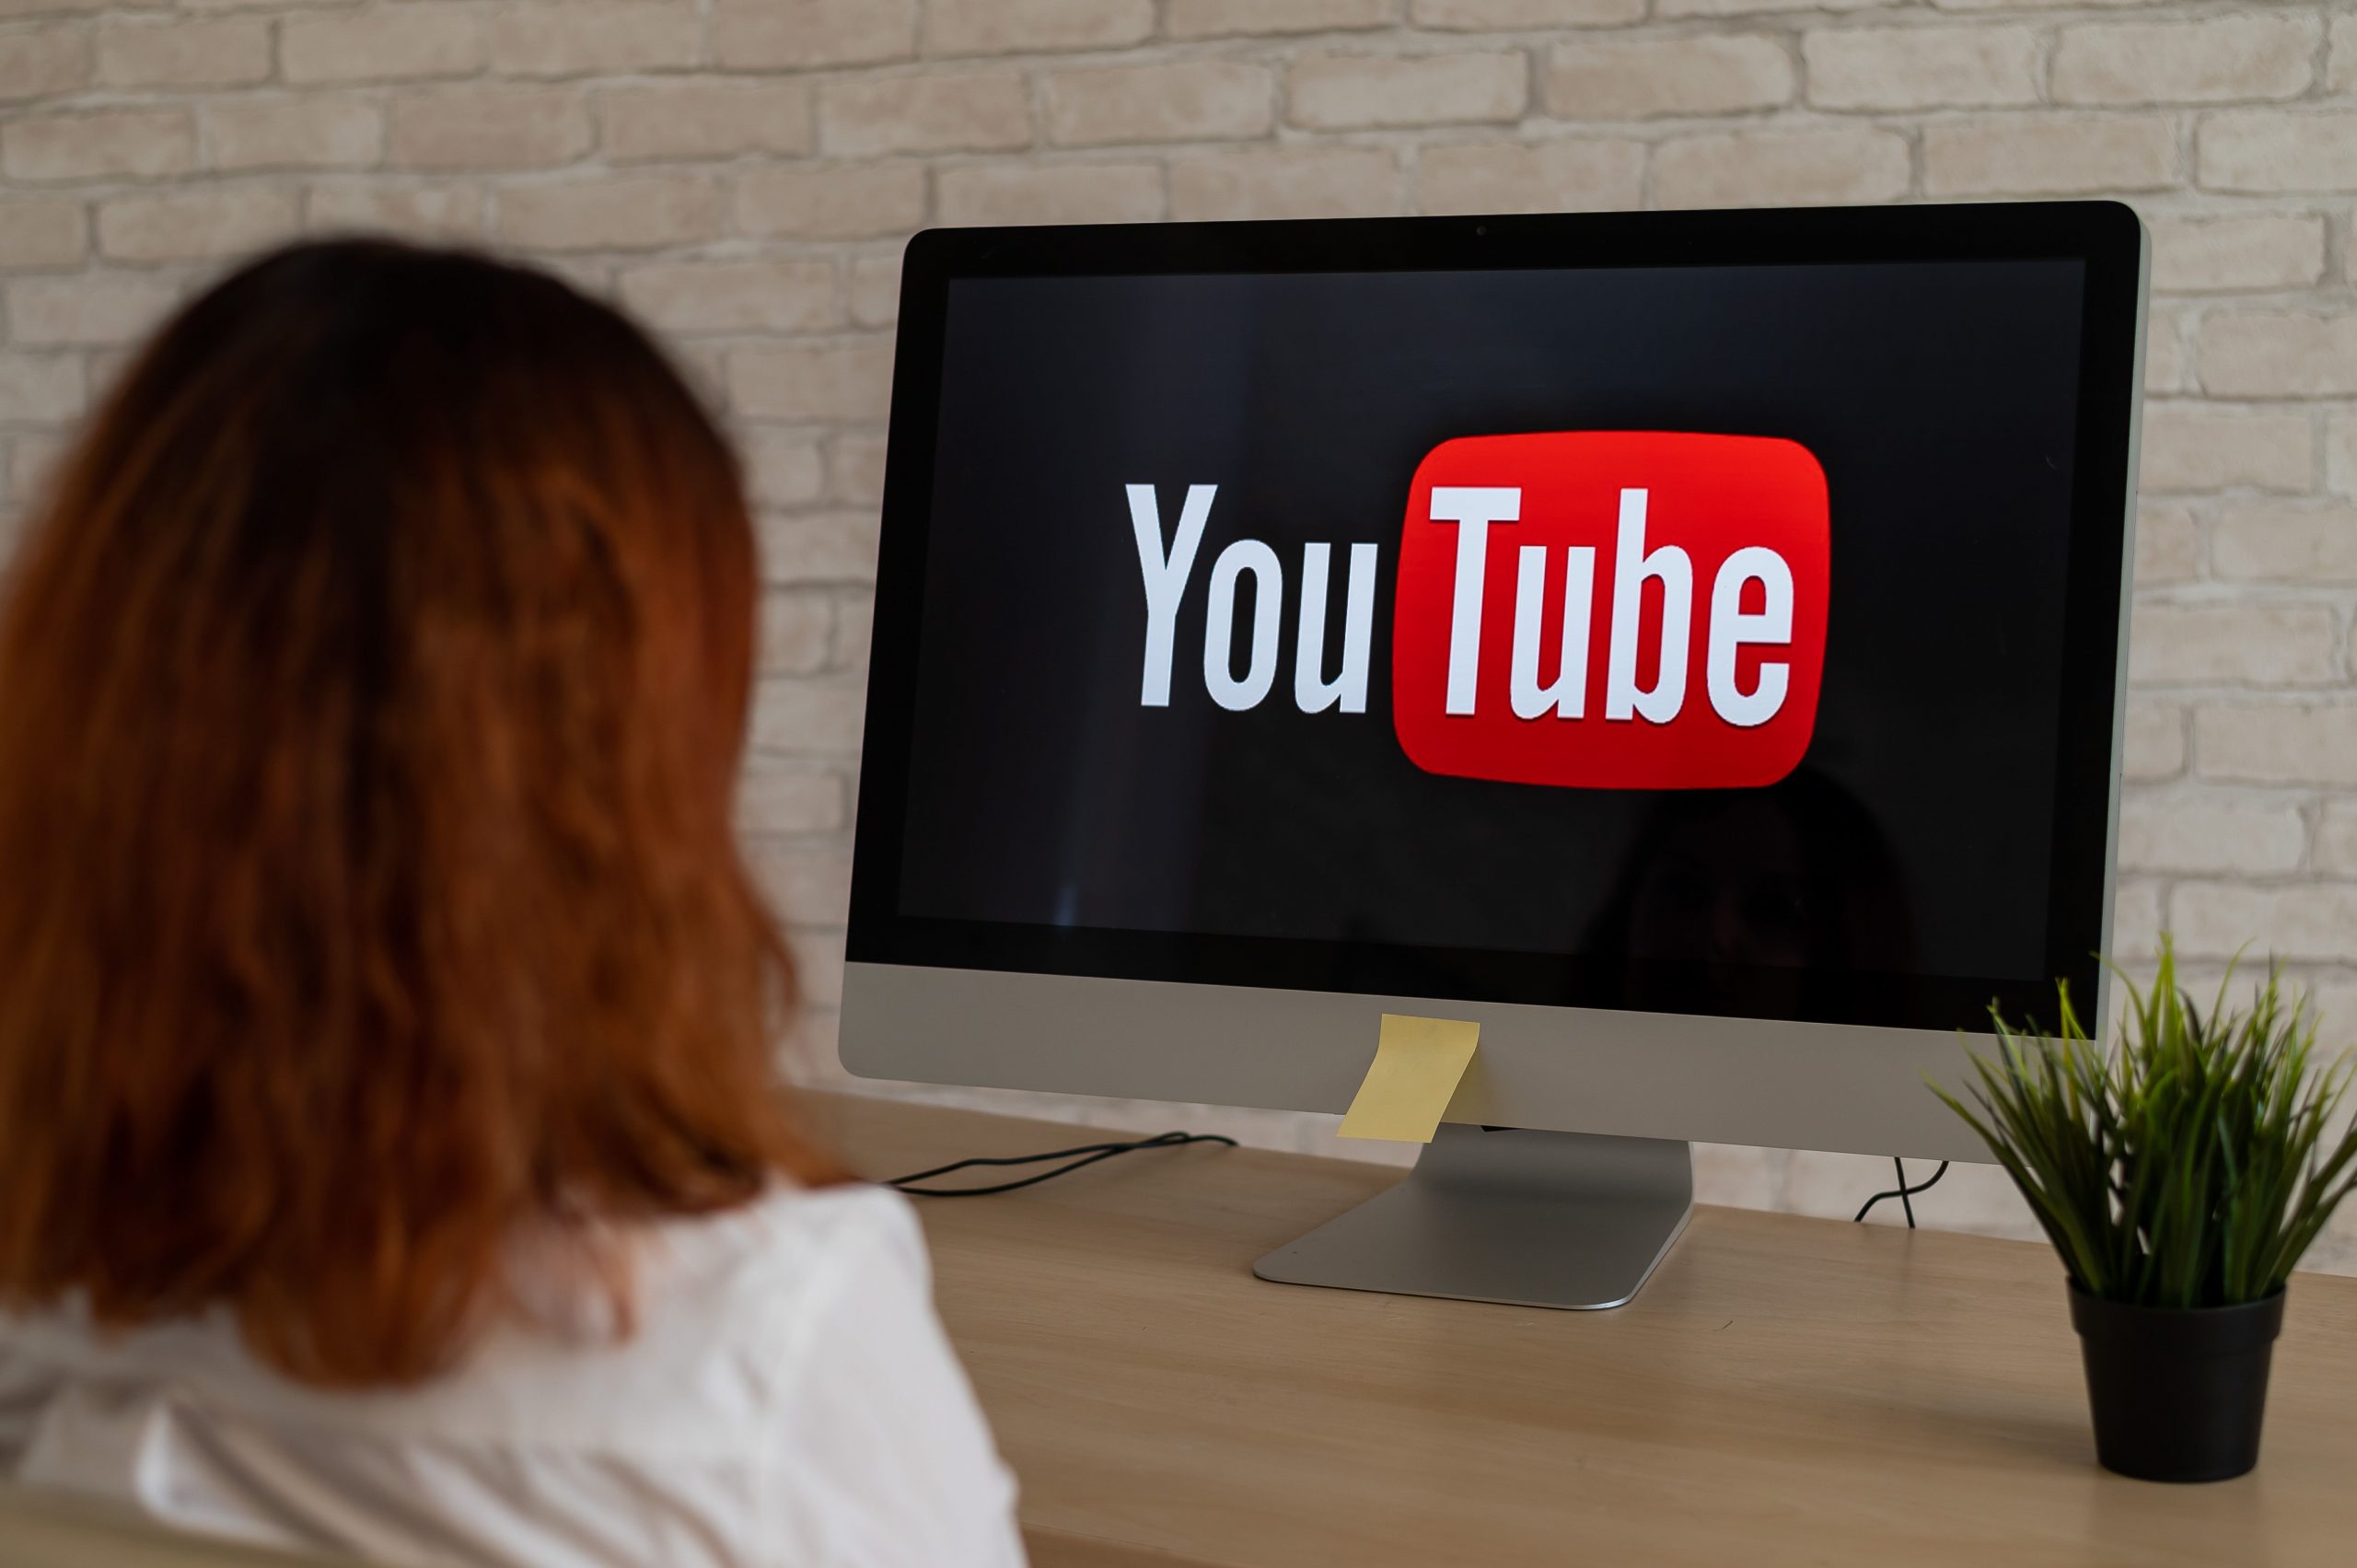 The Top 5 YouTubers and Vloggers Who Have Dominated the Platform.